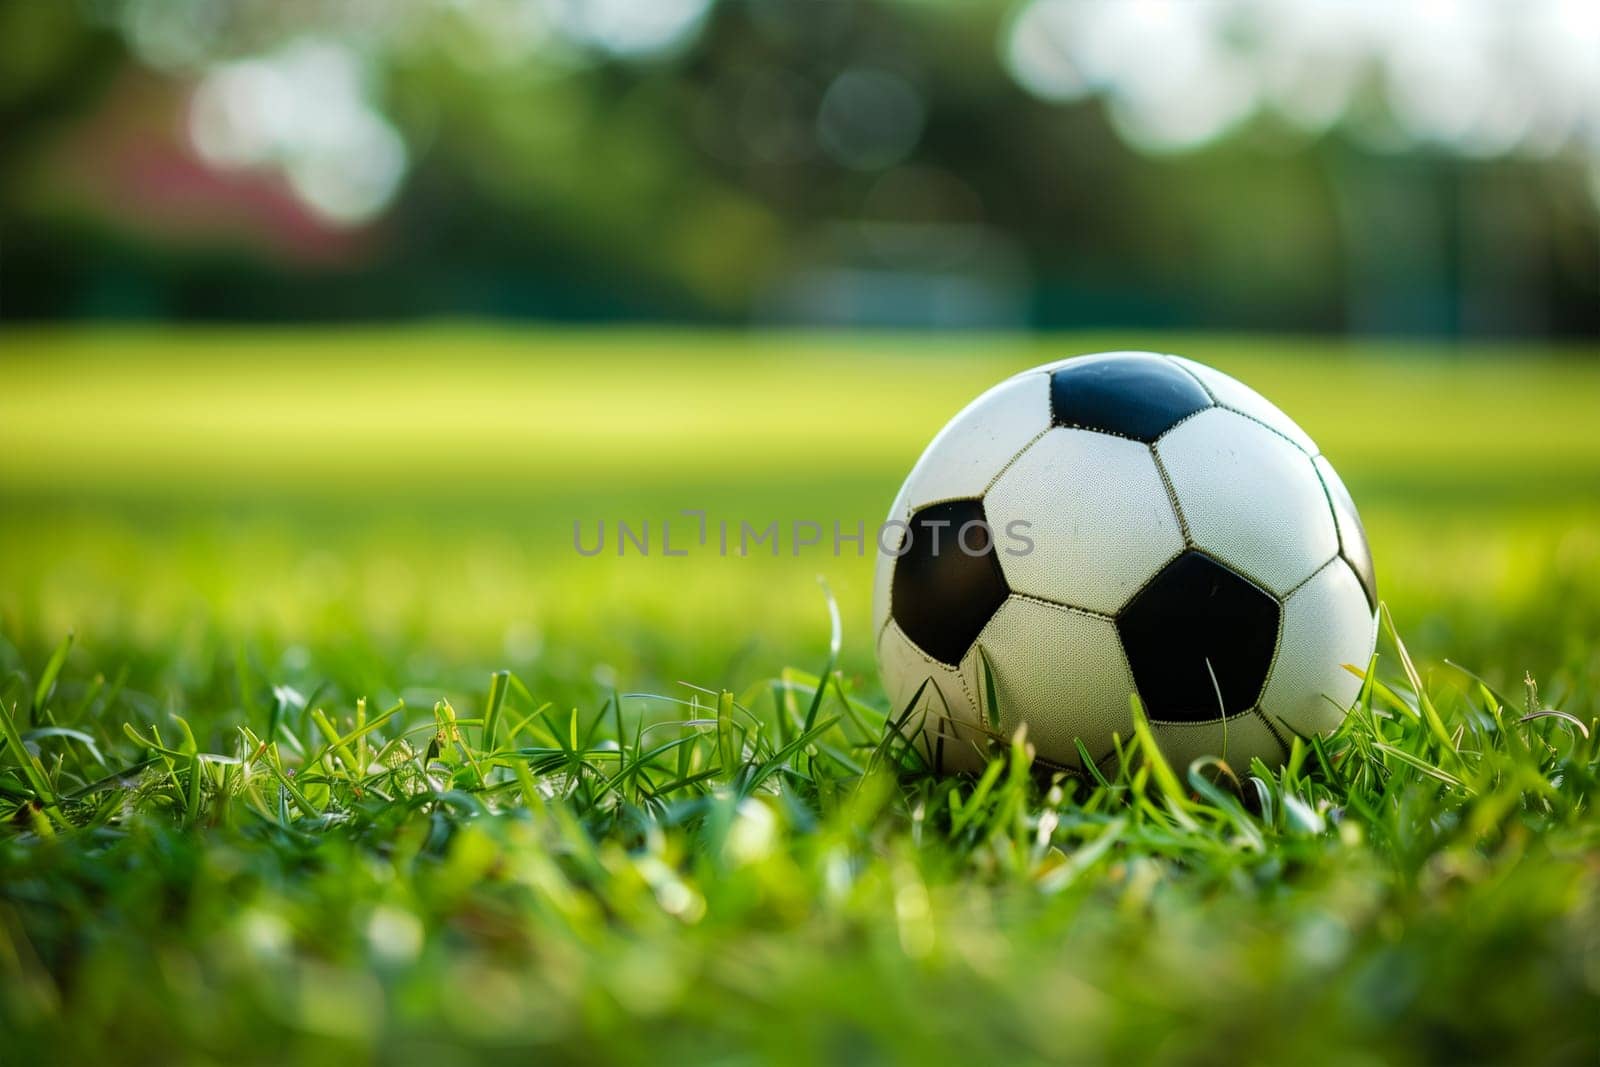 A soccer ball sitting on green grass, representing a scene from a soccer match or training session.